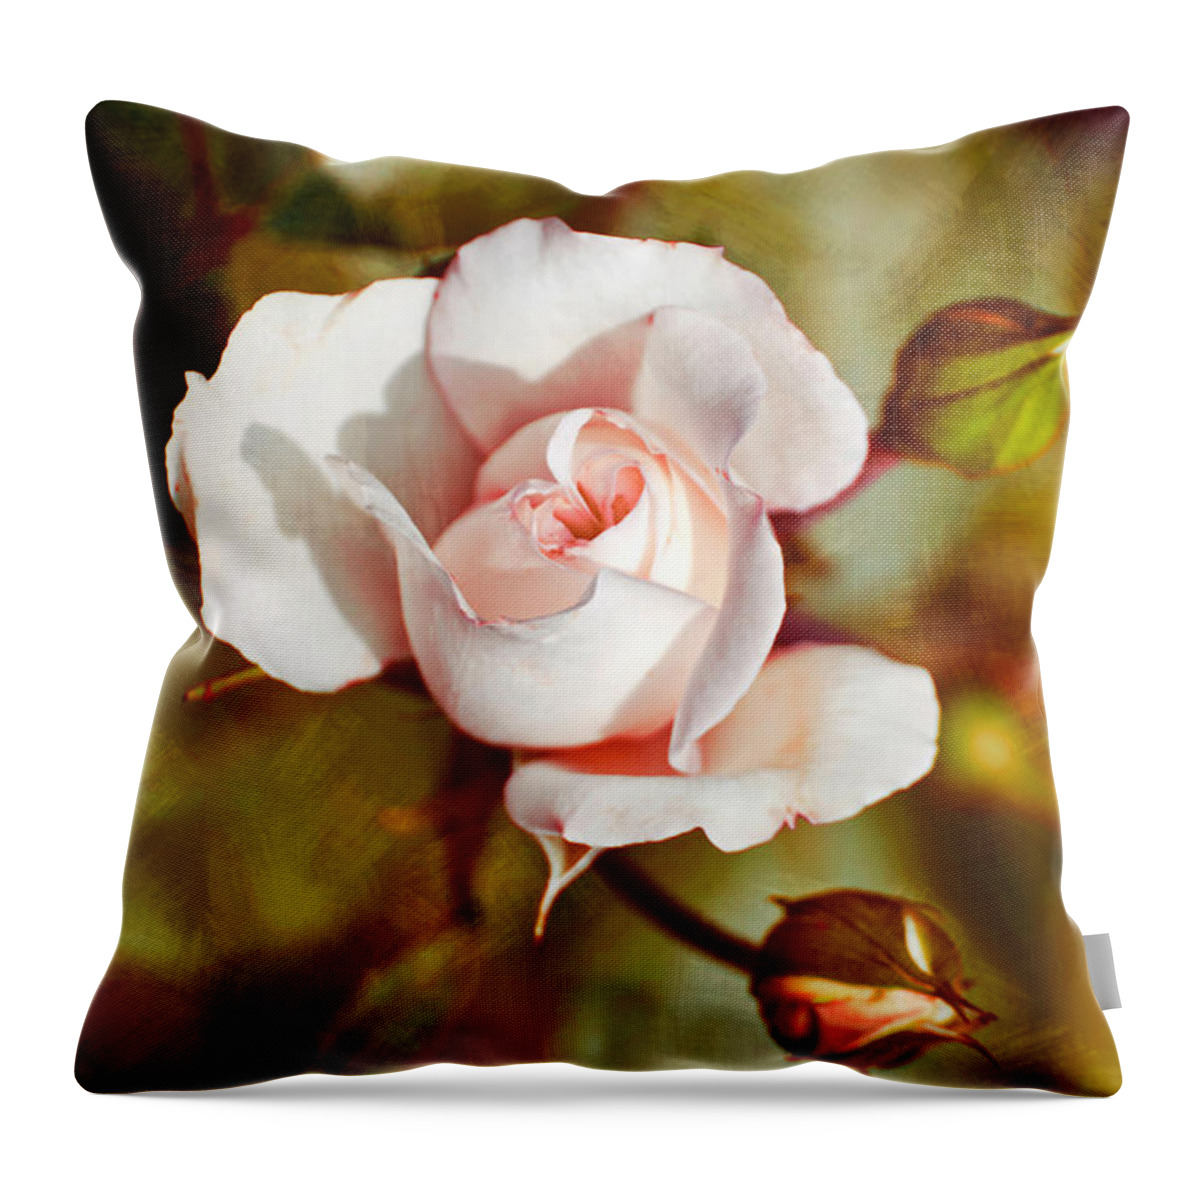 Rose Throw Pillow featuring the photograph Vintage Rose by Christina Rollo